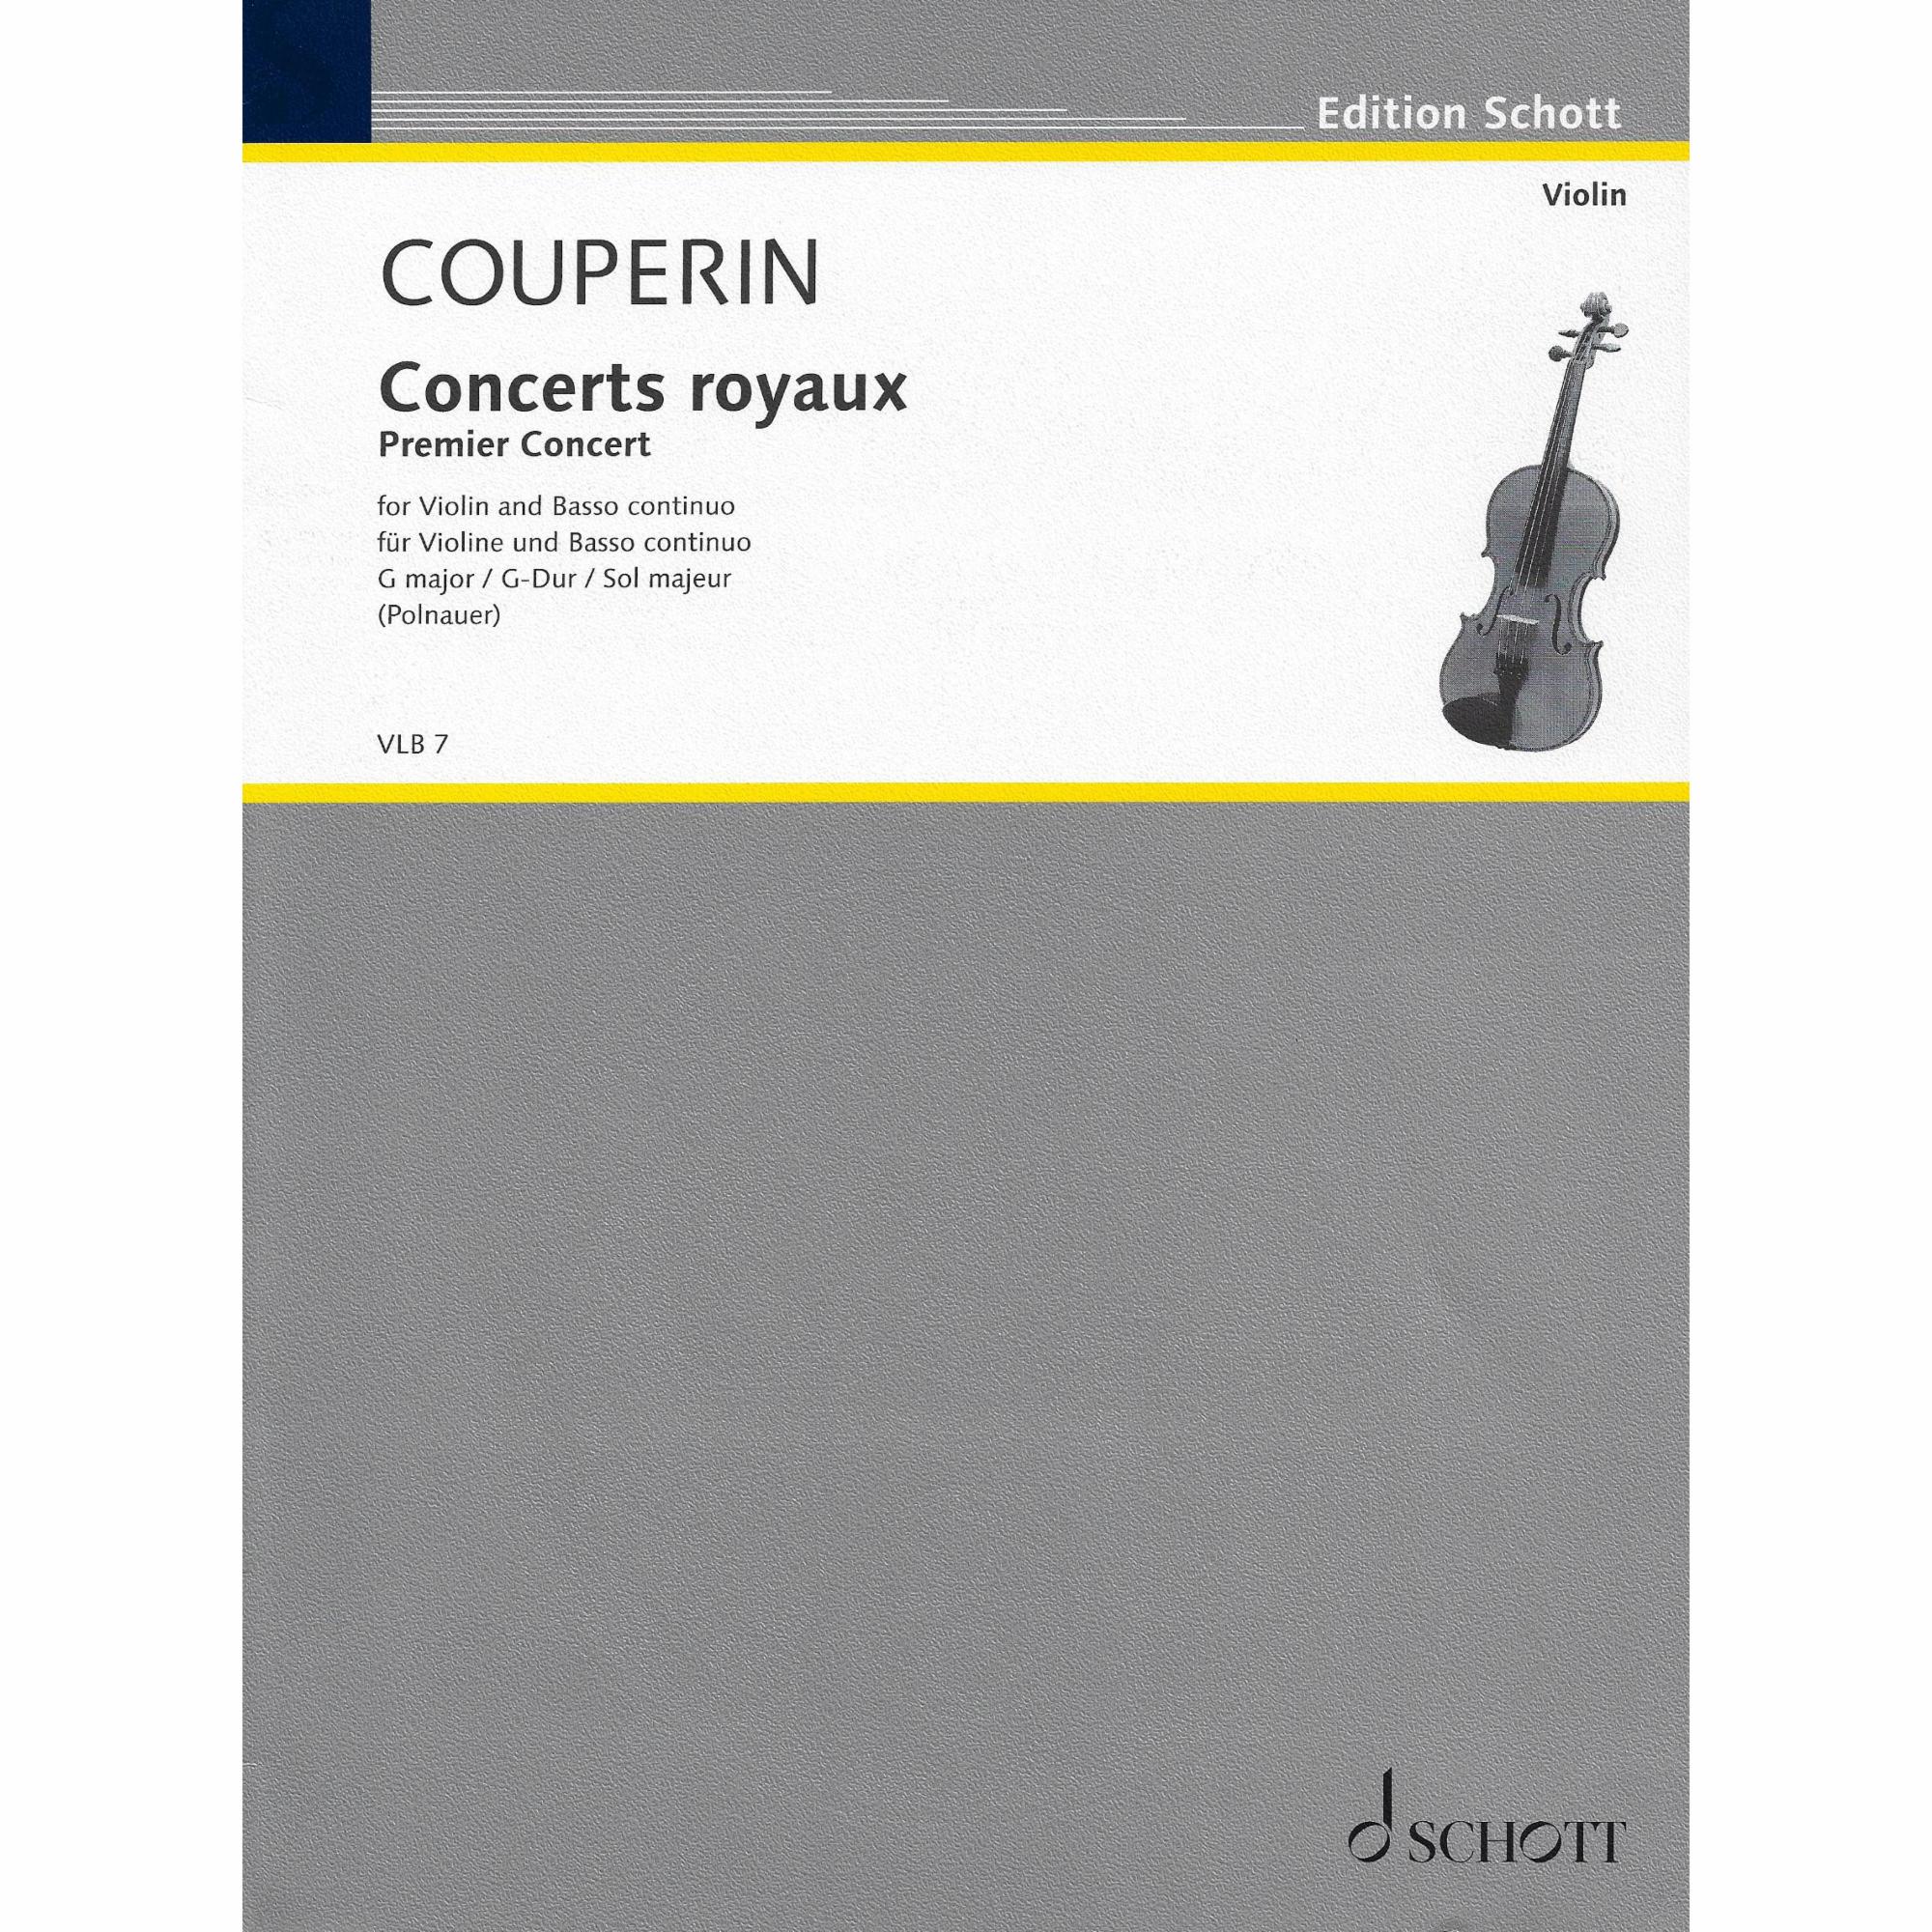 Couperin -- Concerts royaux: Premier Concert for Violin and Basso Continuo